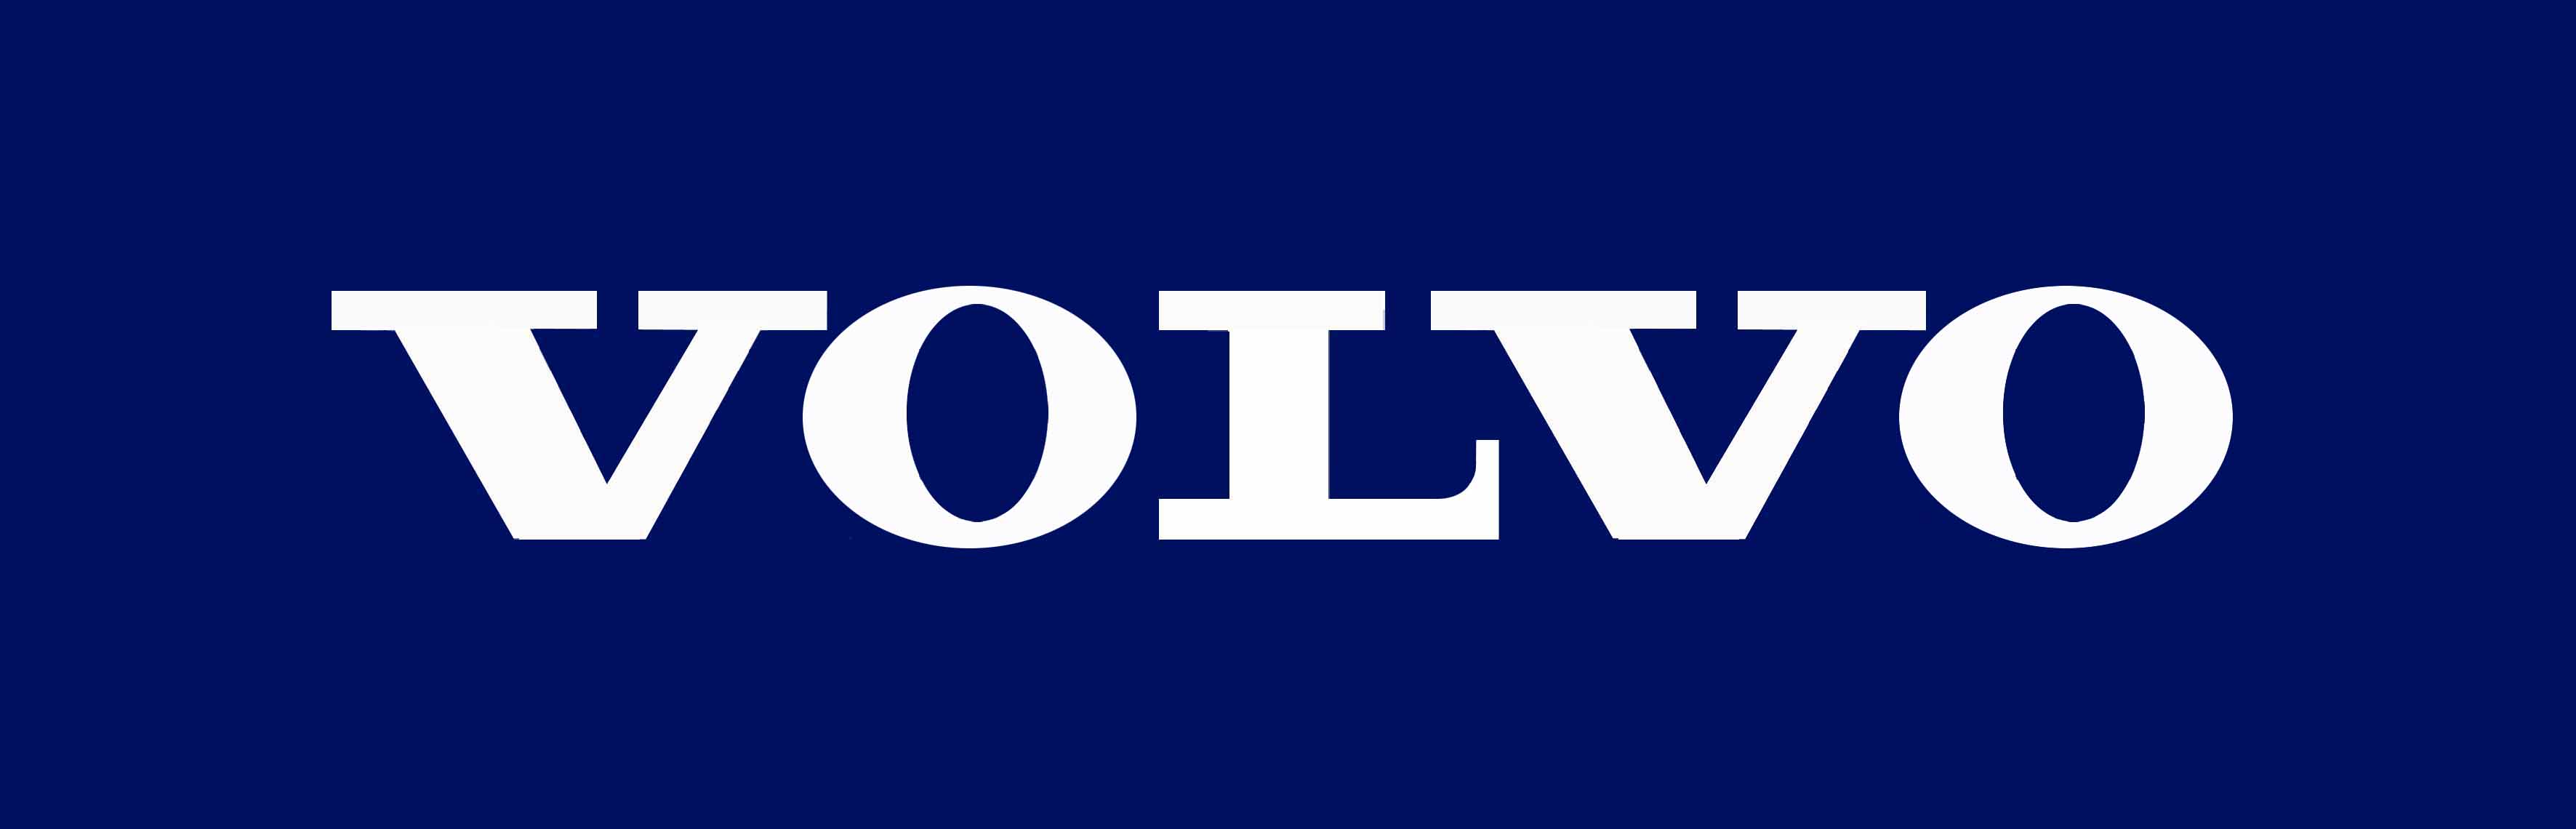 Simple volvo logo on blue background